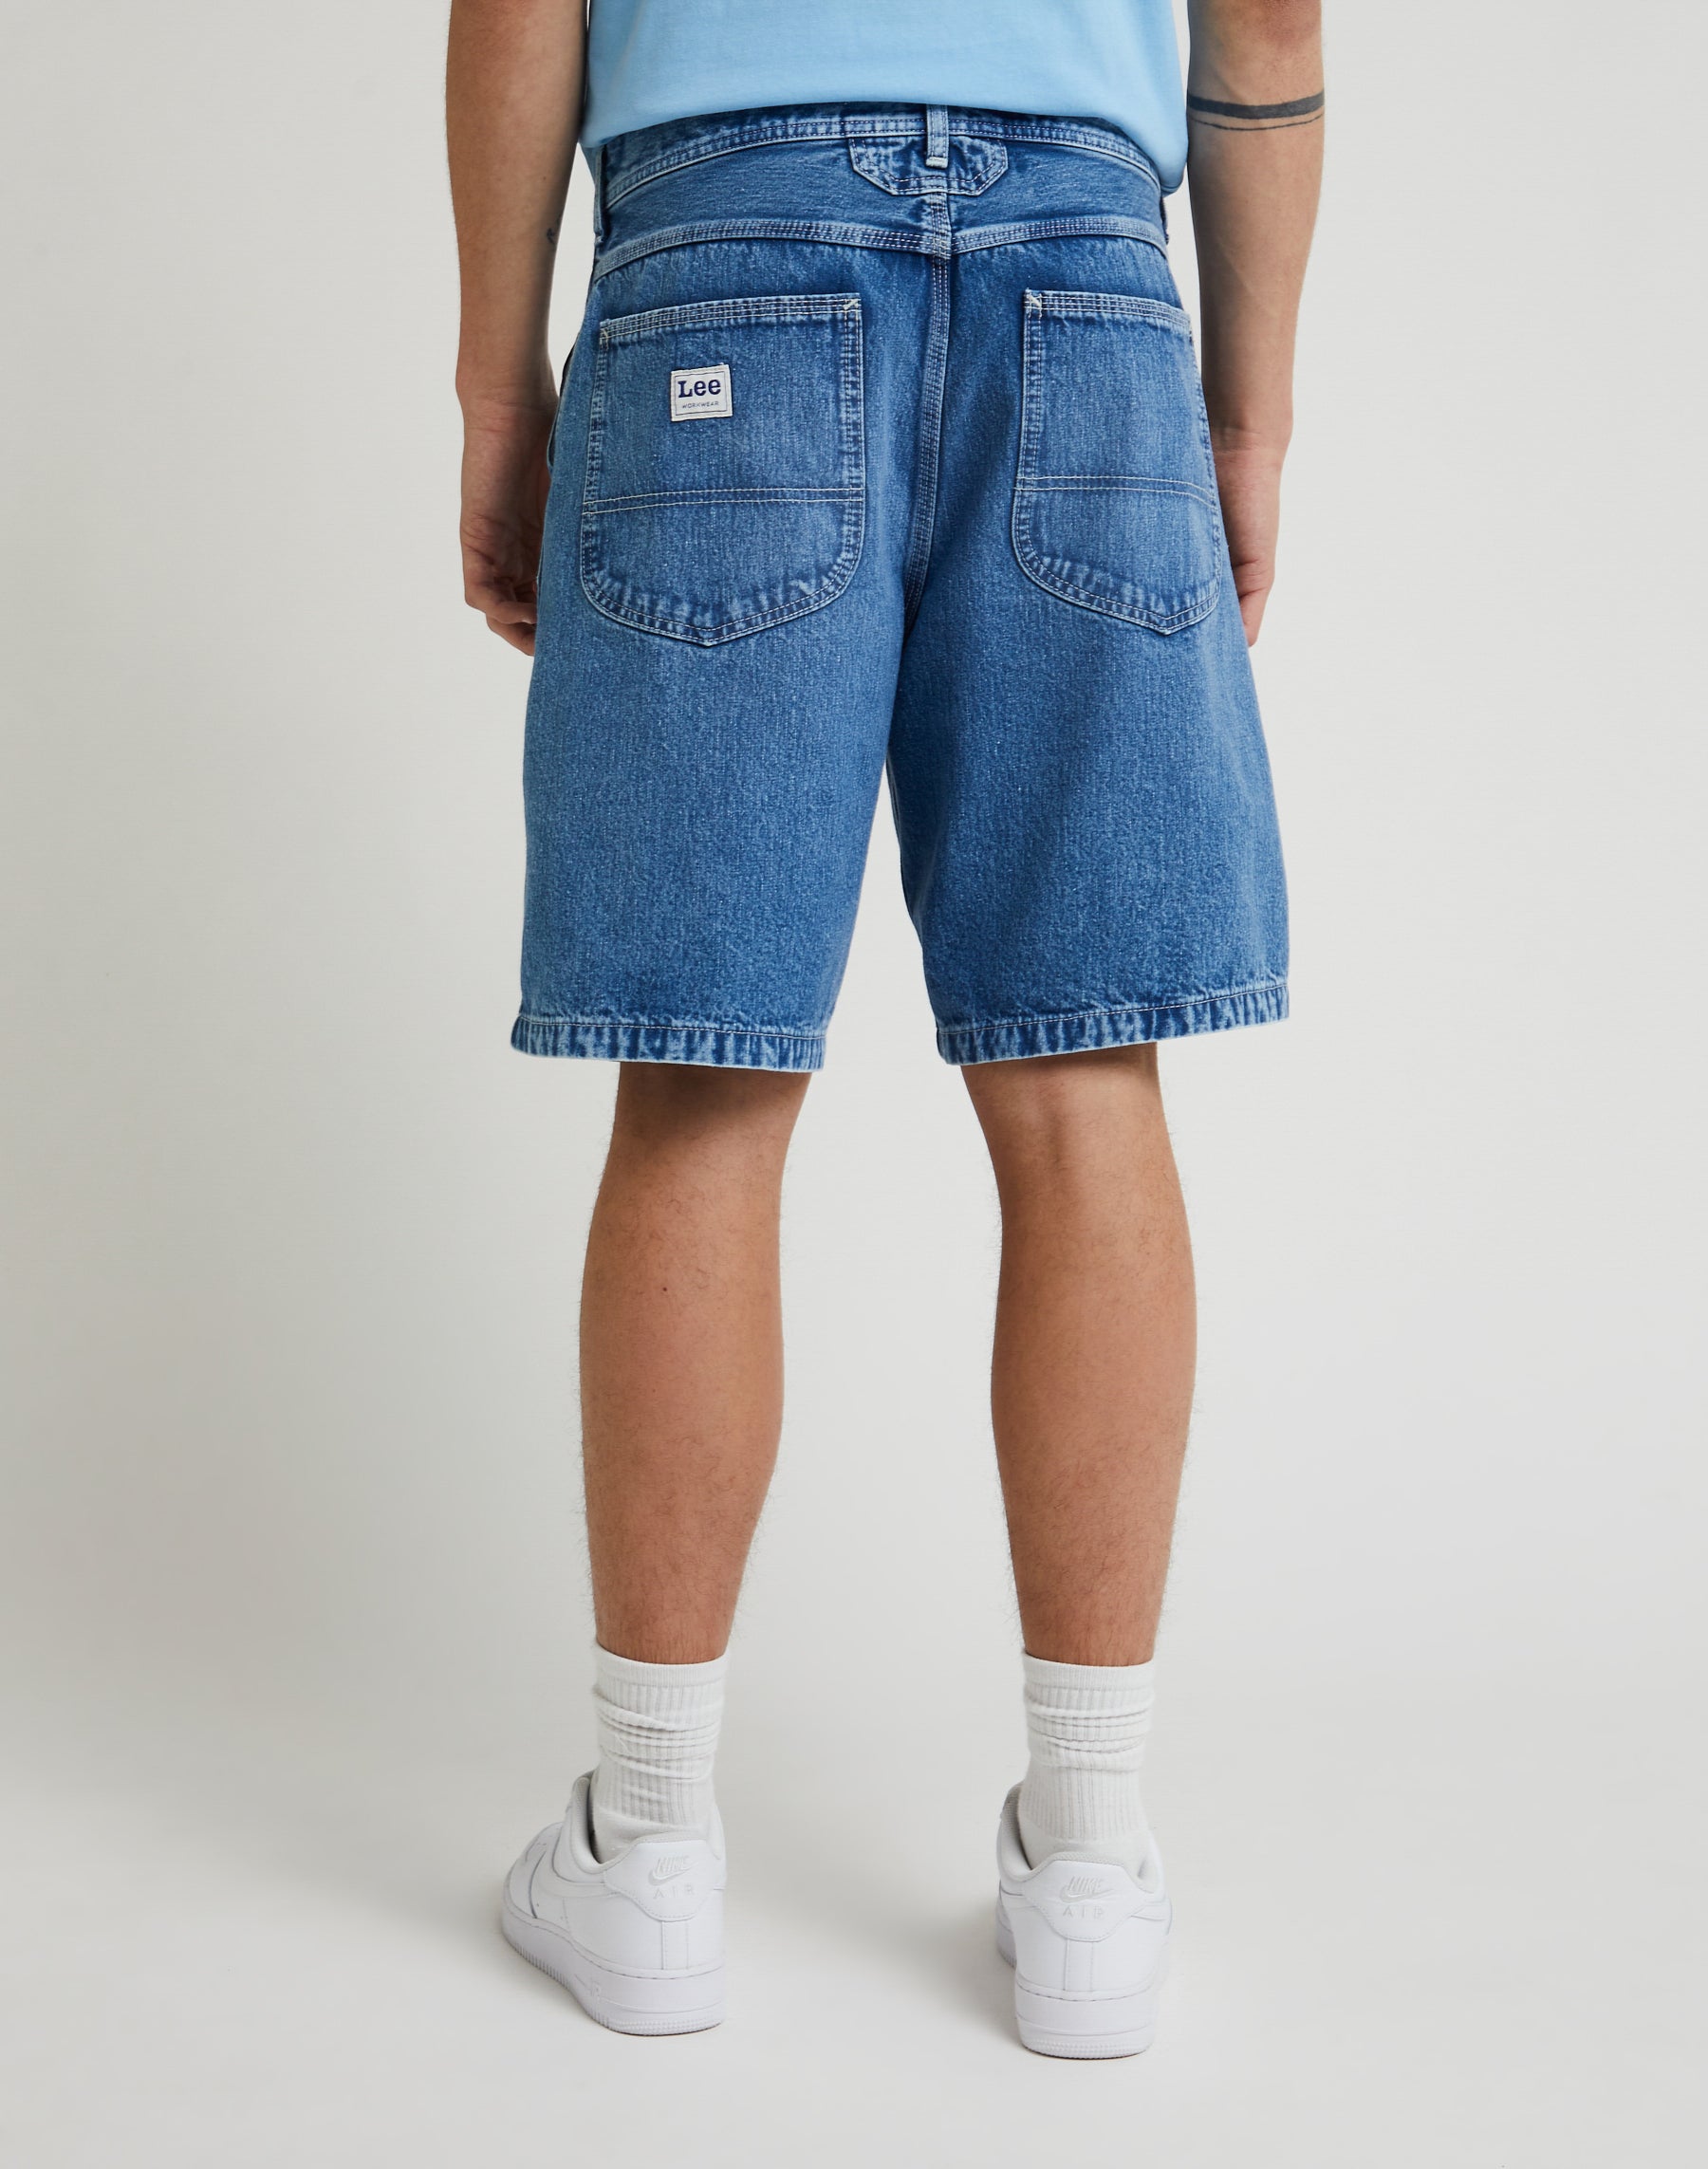 90S Short in Relax Worn Jeansshorts Lee   